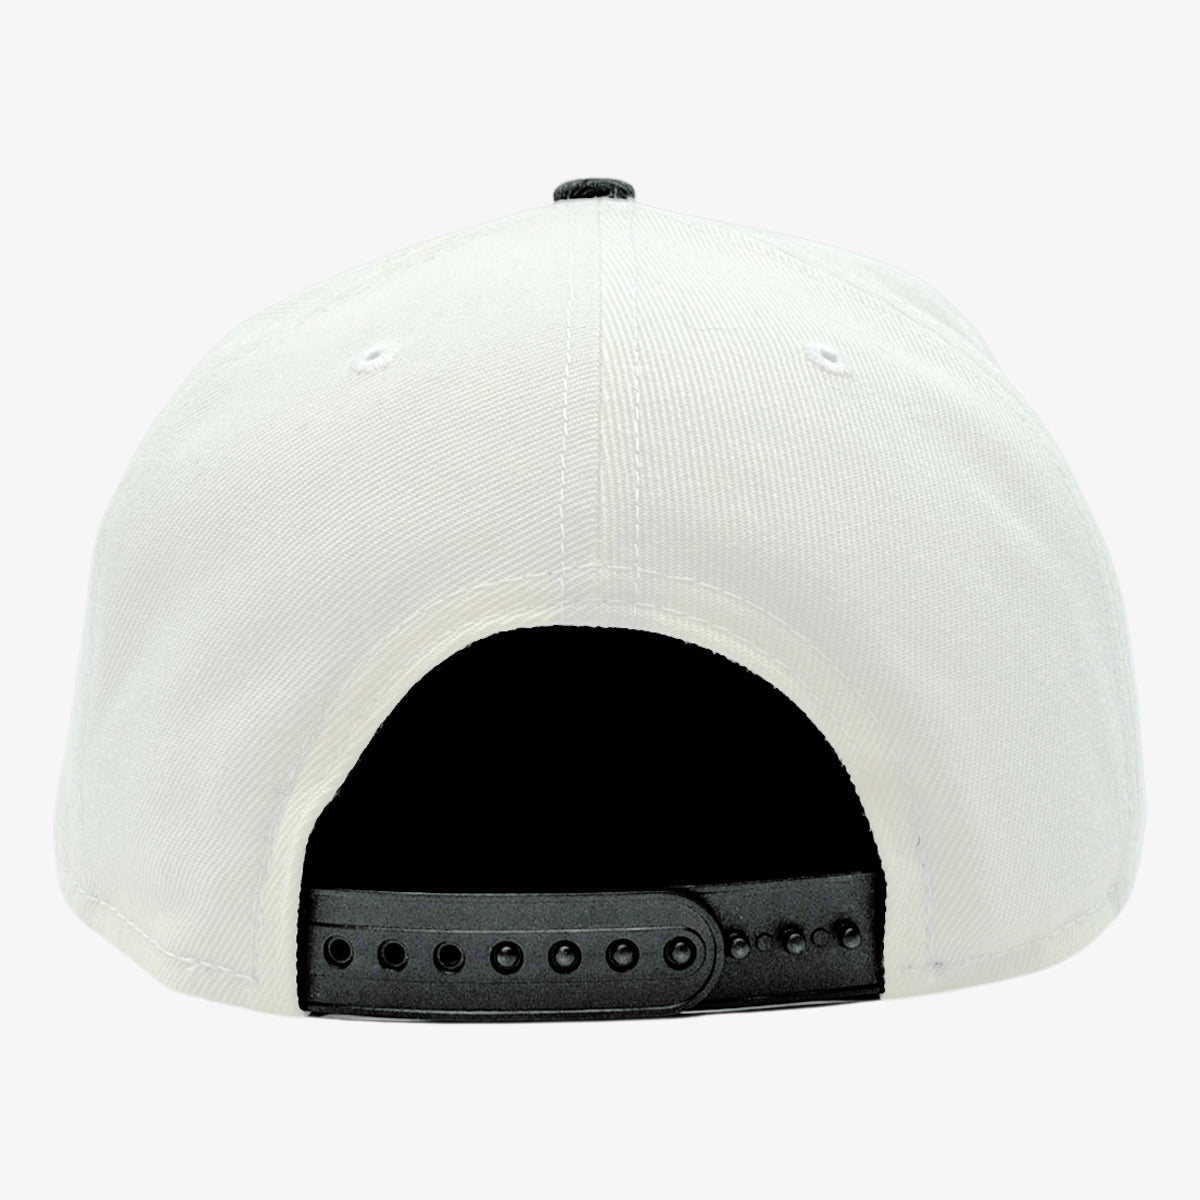 New Era Official 9FIFTY Snapback